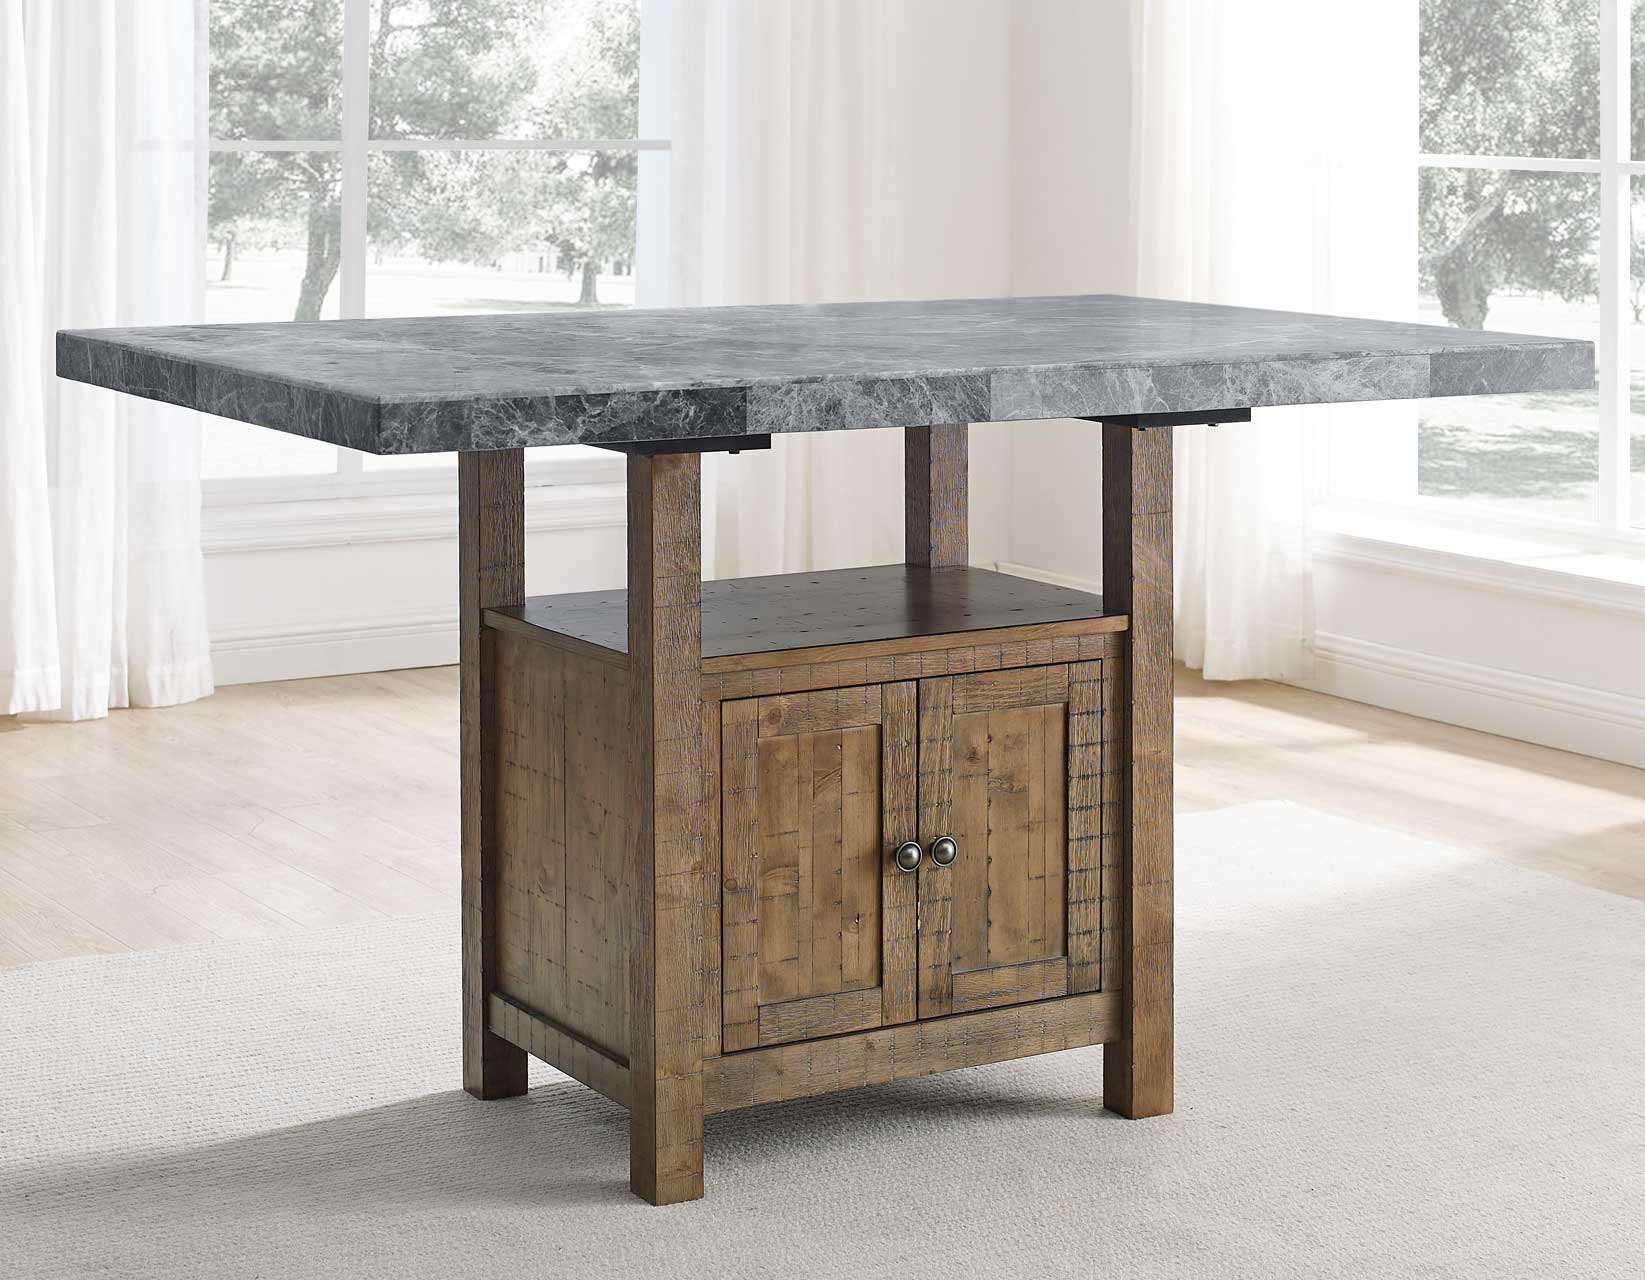 Grayson Marble Top Counter Storage Dining Collection by Steve silver